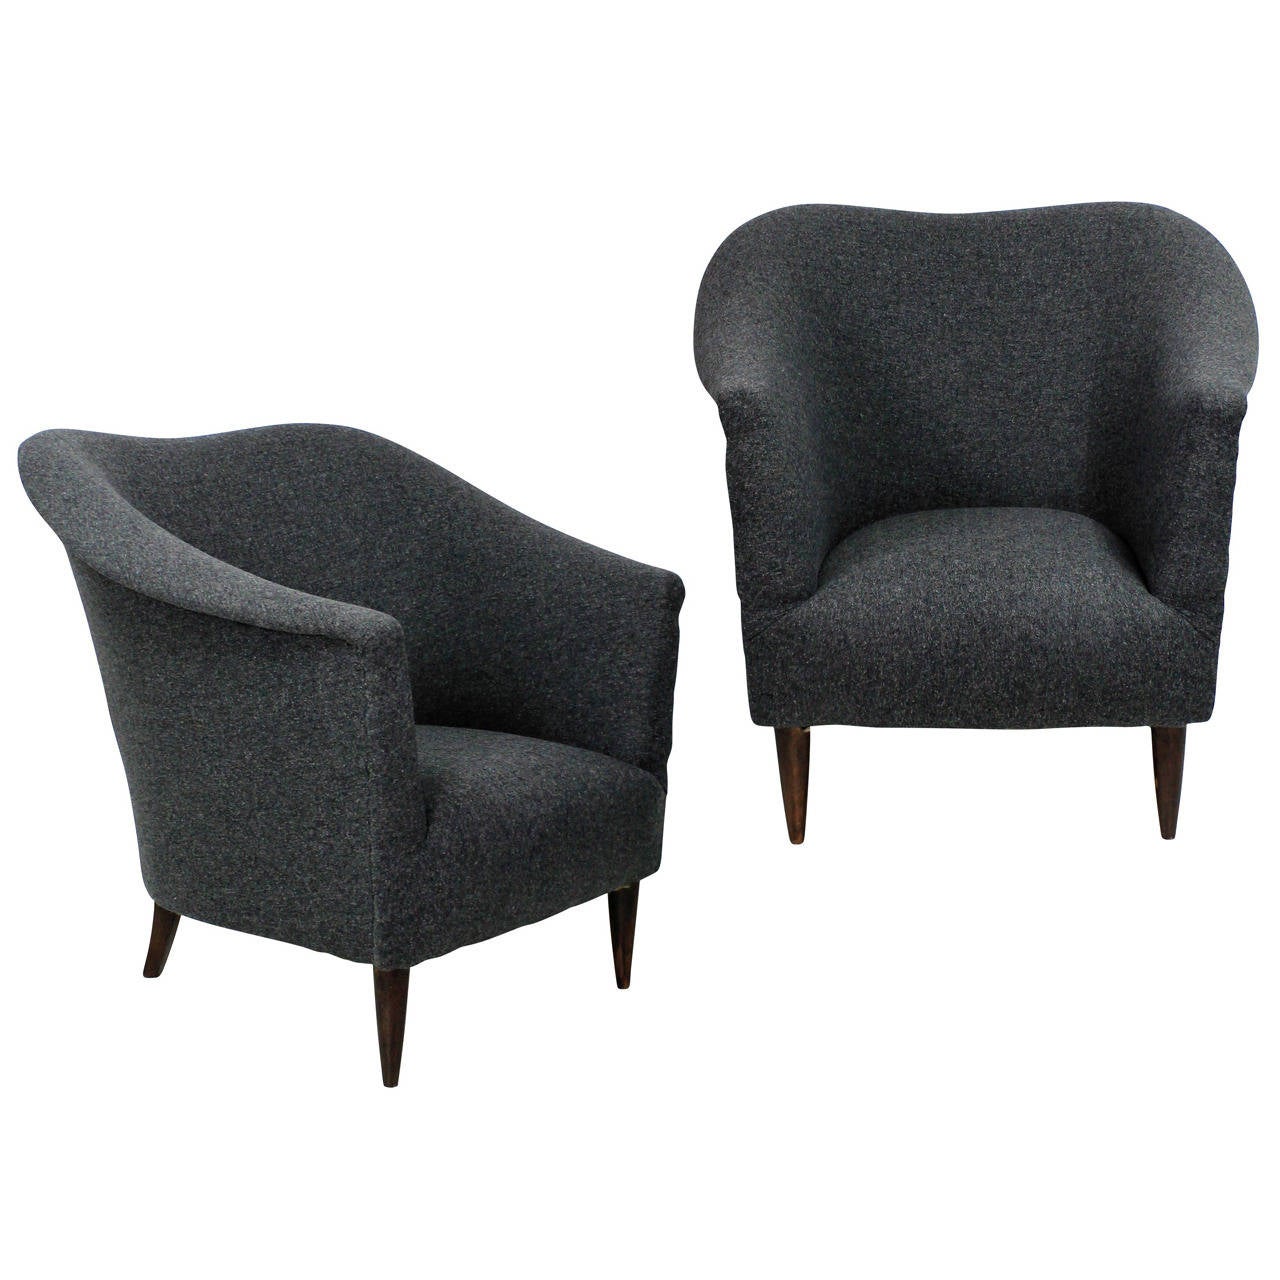 A pair of Italian sculptural armchairs in the style of Parisi. With turned French polished feet and newly upholstered in grey wool.